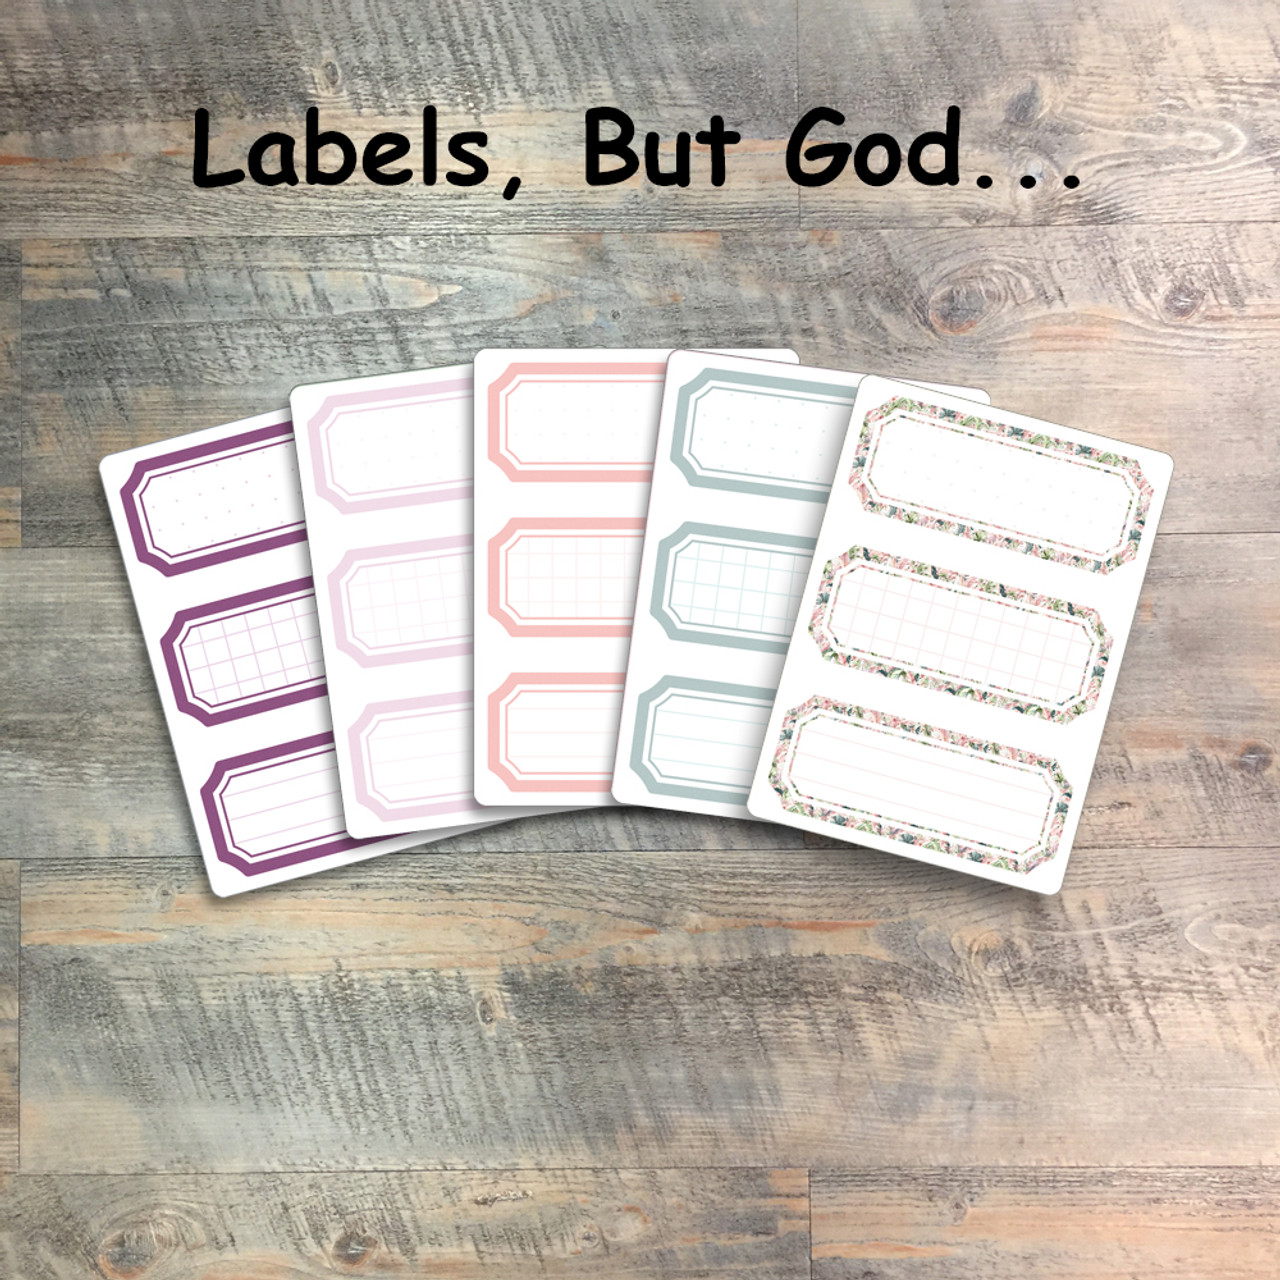 But God Labels - 5 Sheets of Label Stickers from BTW4G- Inspired by "But God"